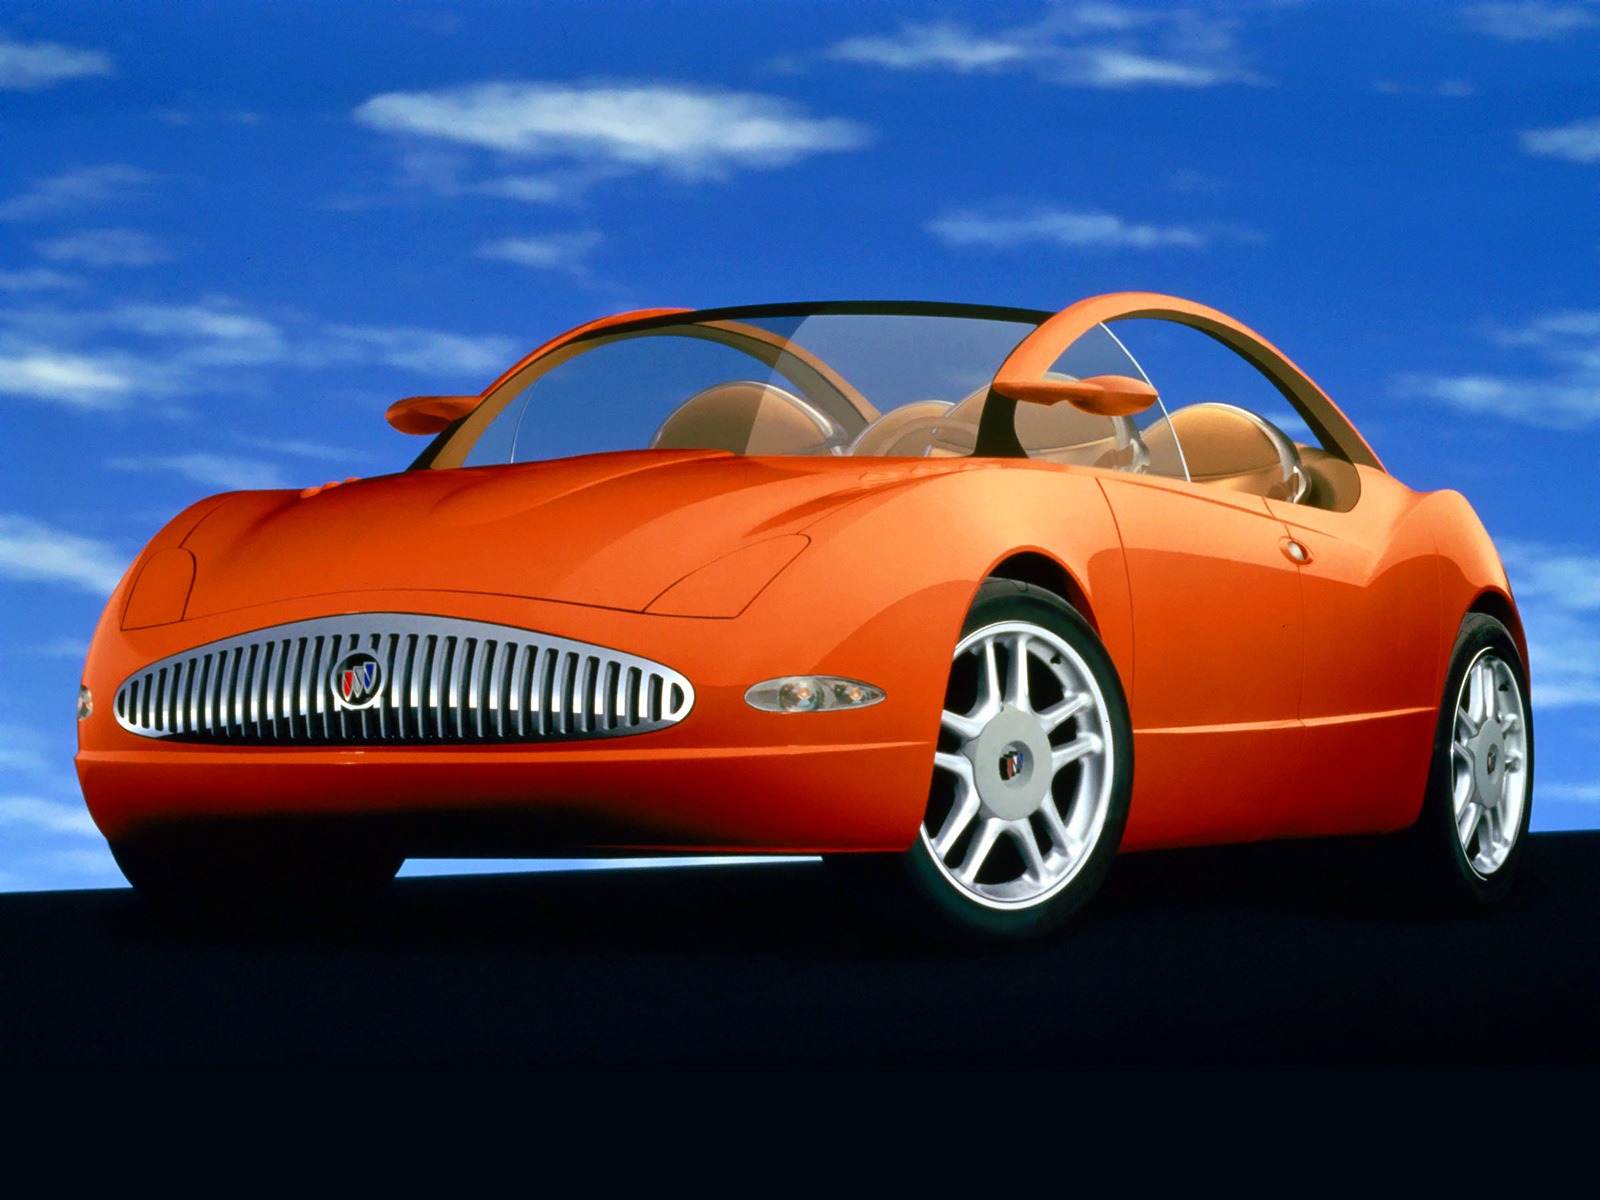 Buick Cielo (1999) - Old Concept Cars